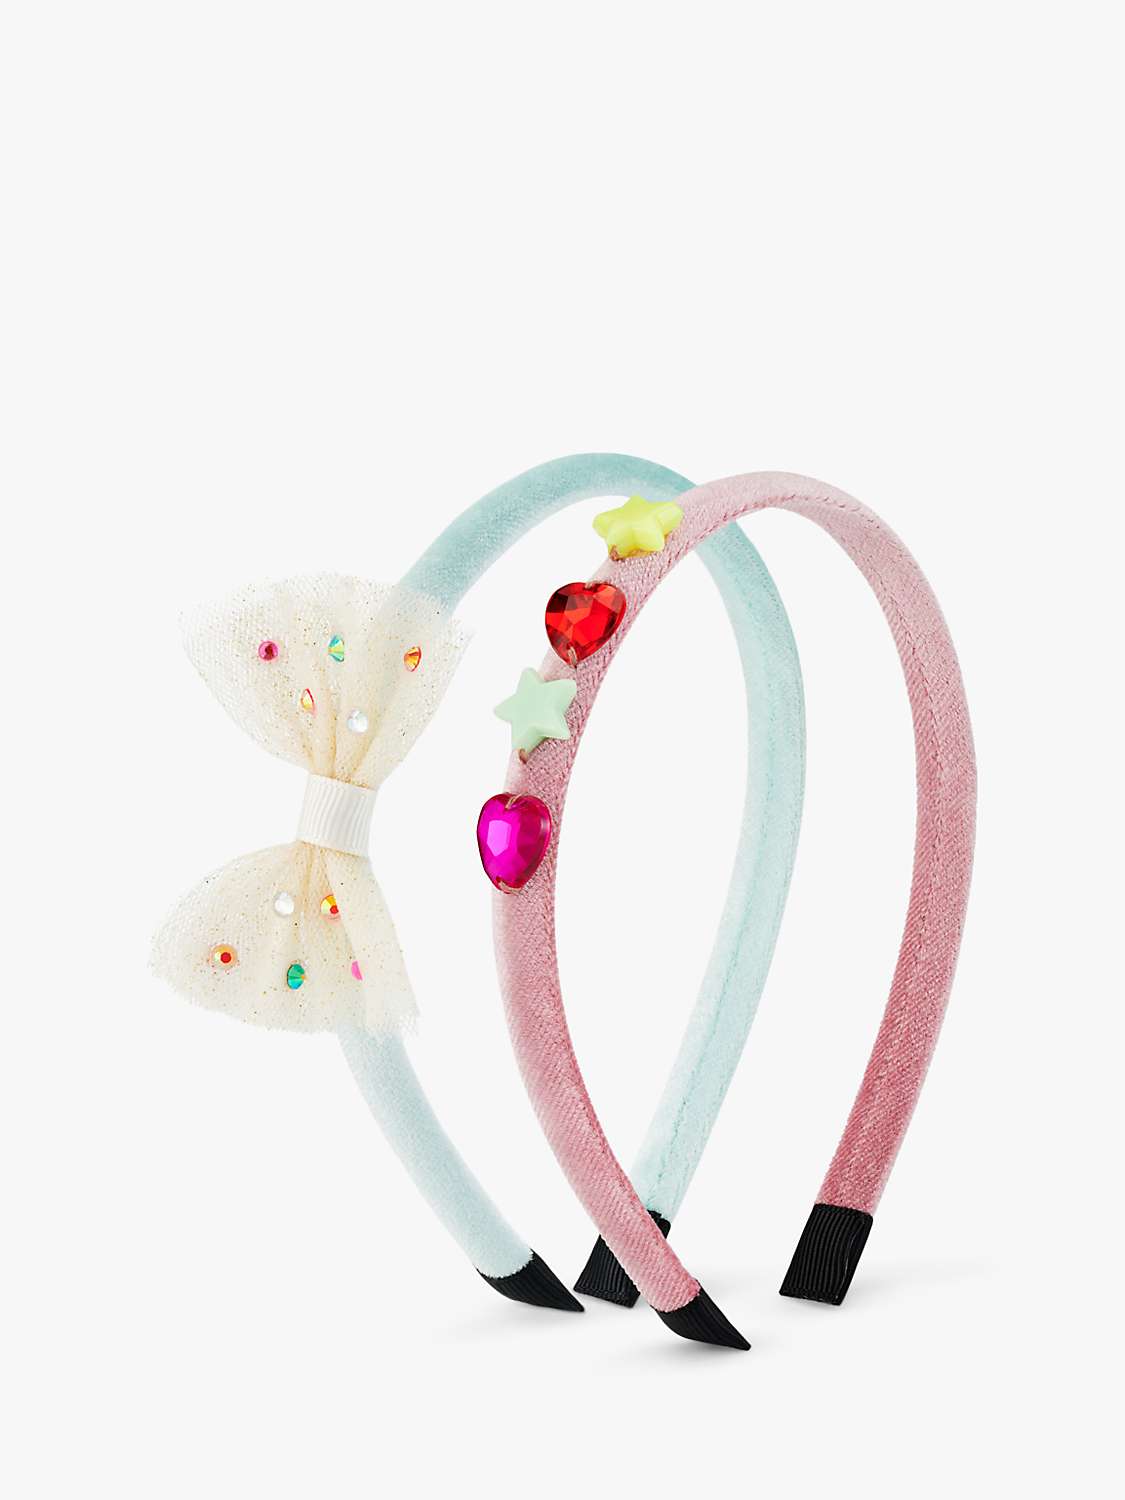 Buy Stych Kids' Tulle Bow & Gem Alice Bands, Pack of 2, Pink/Multi Online at johnlewis.com